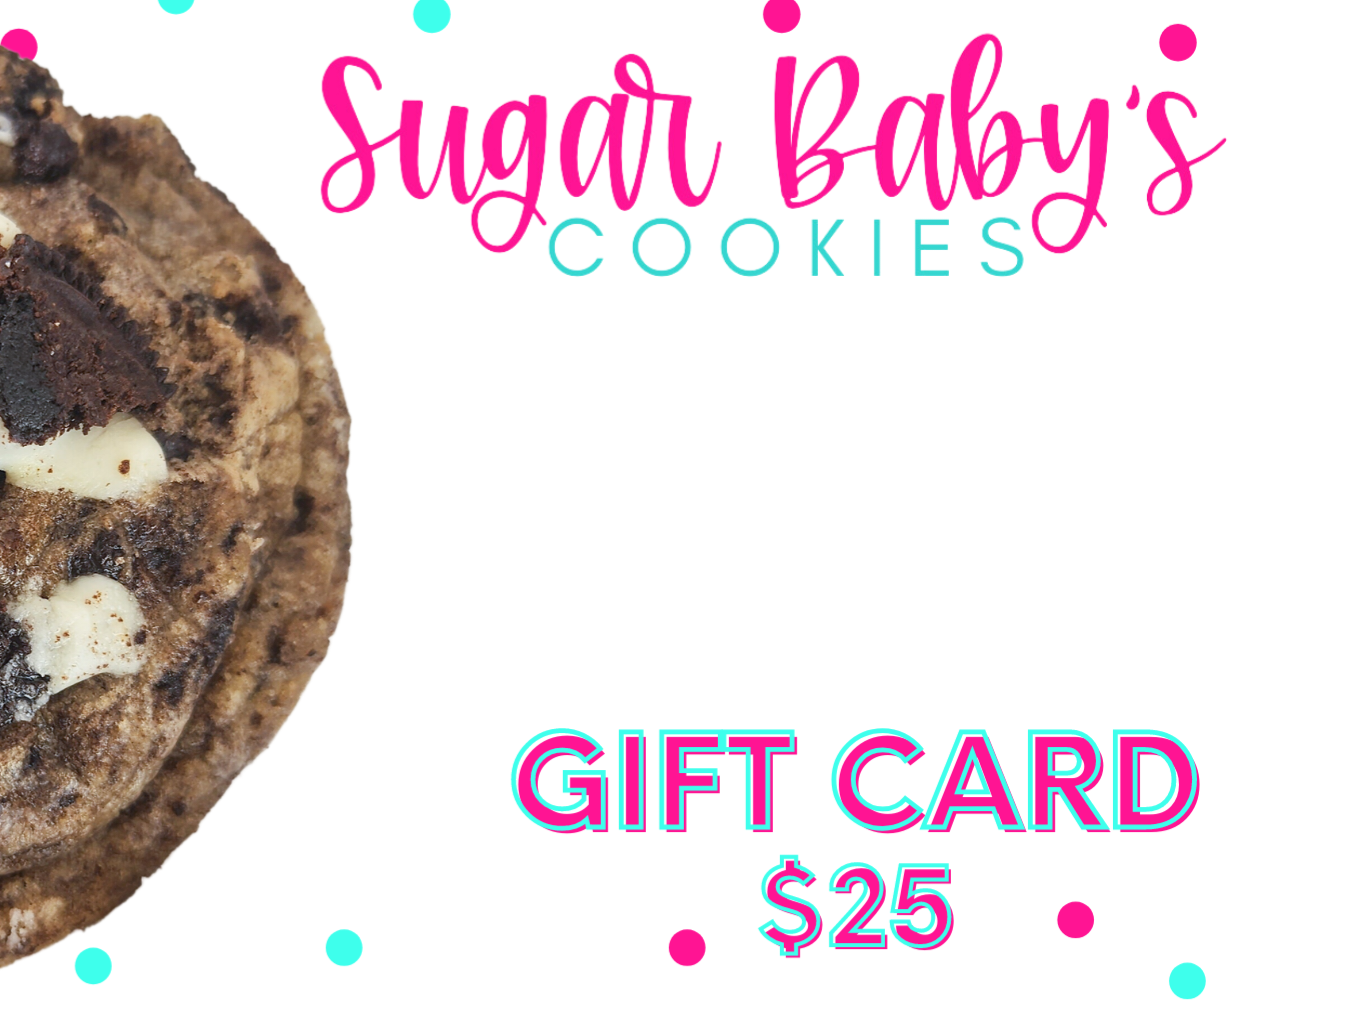 Sugar Baby's Cookies Gift Cards